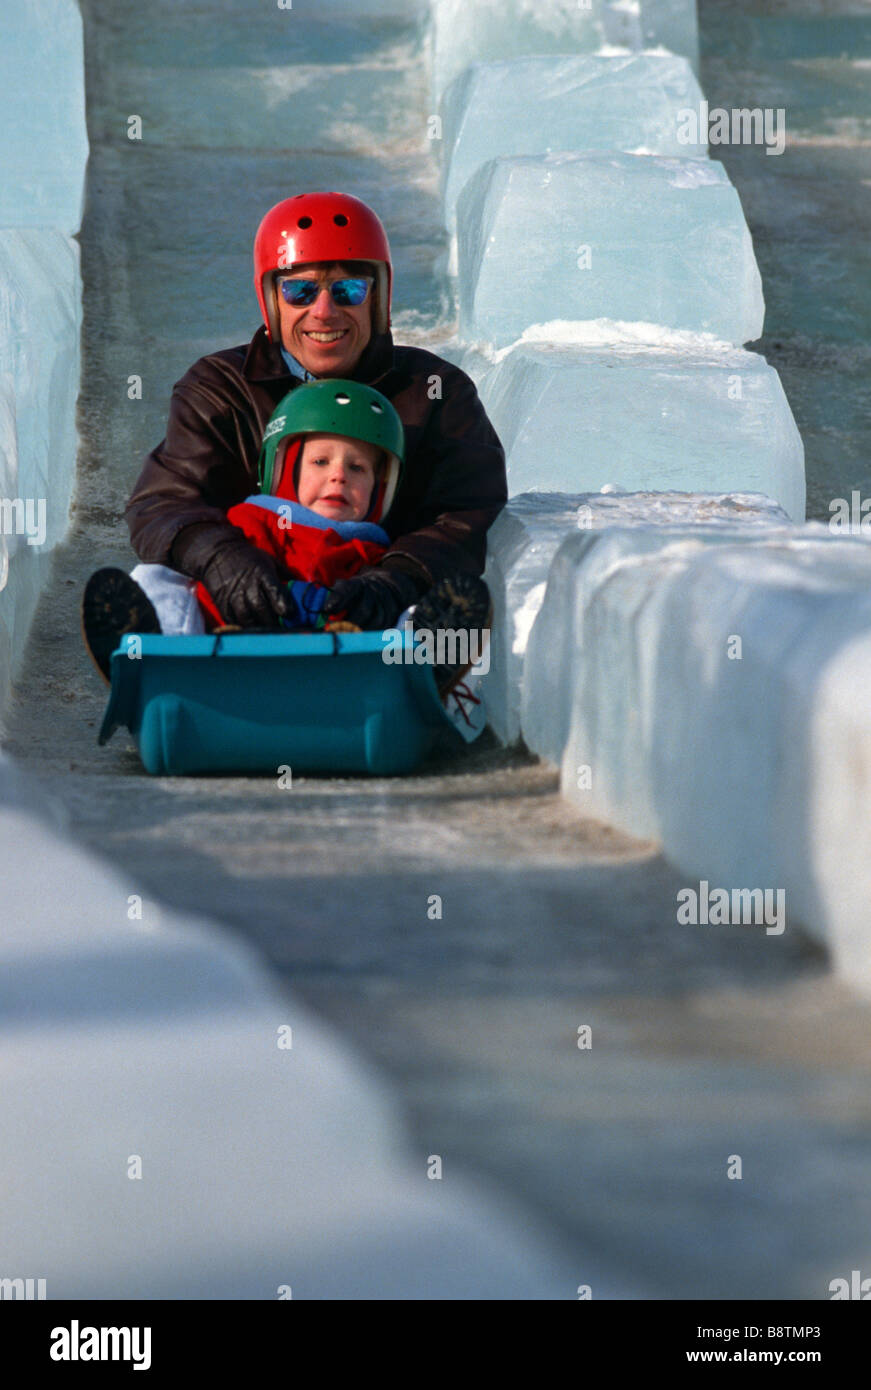 FATHER AND SON ON THE GIANT ICE SLIDE DURING ST. PAUL, MINNESOTA'S ANNUAL WINTER CARNIVAL. Stock Photo